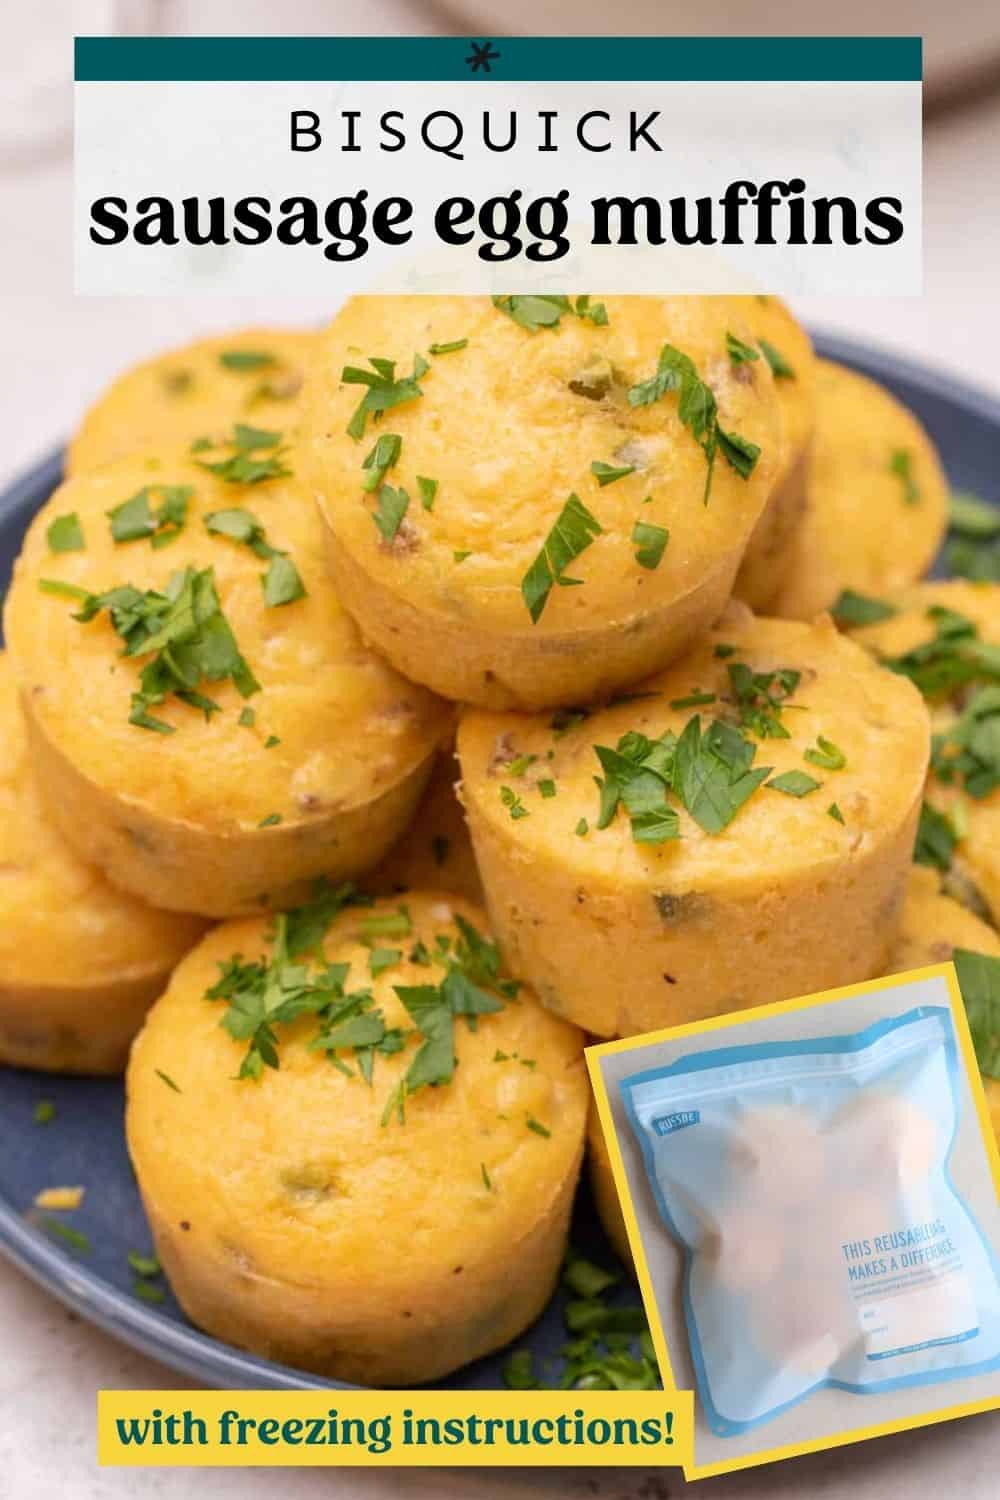 yellow savory breakfast muffins with parsley sprinkled on top.